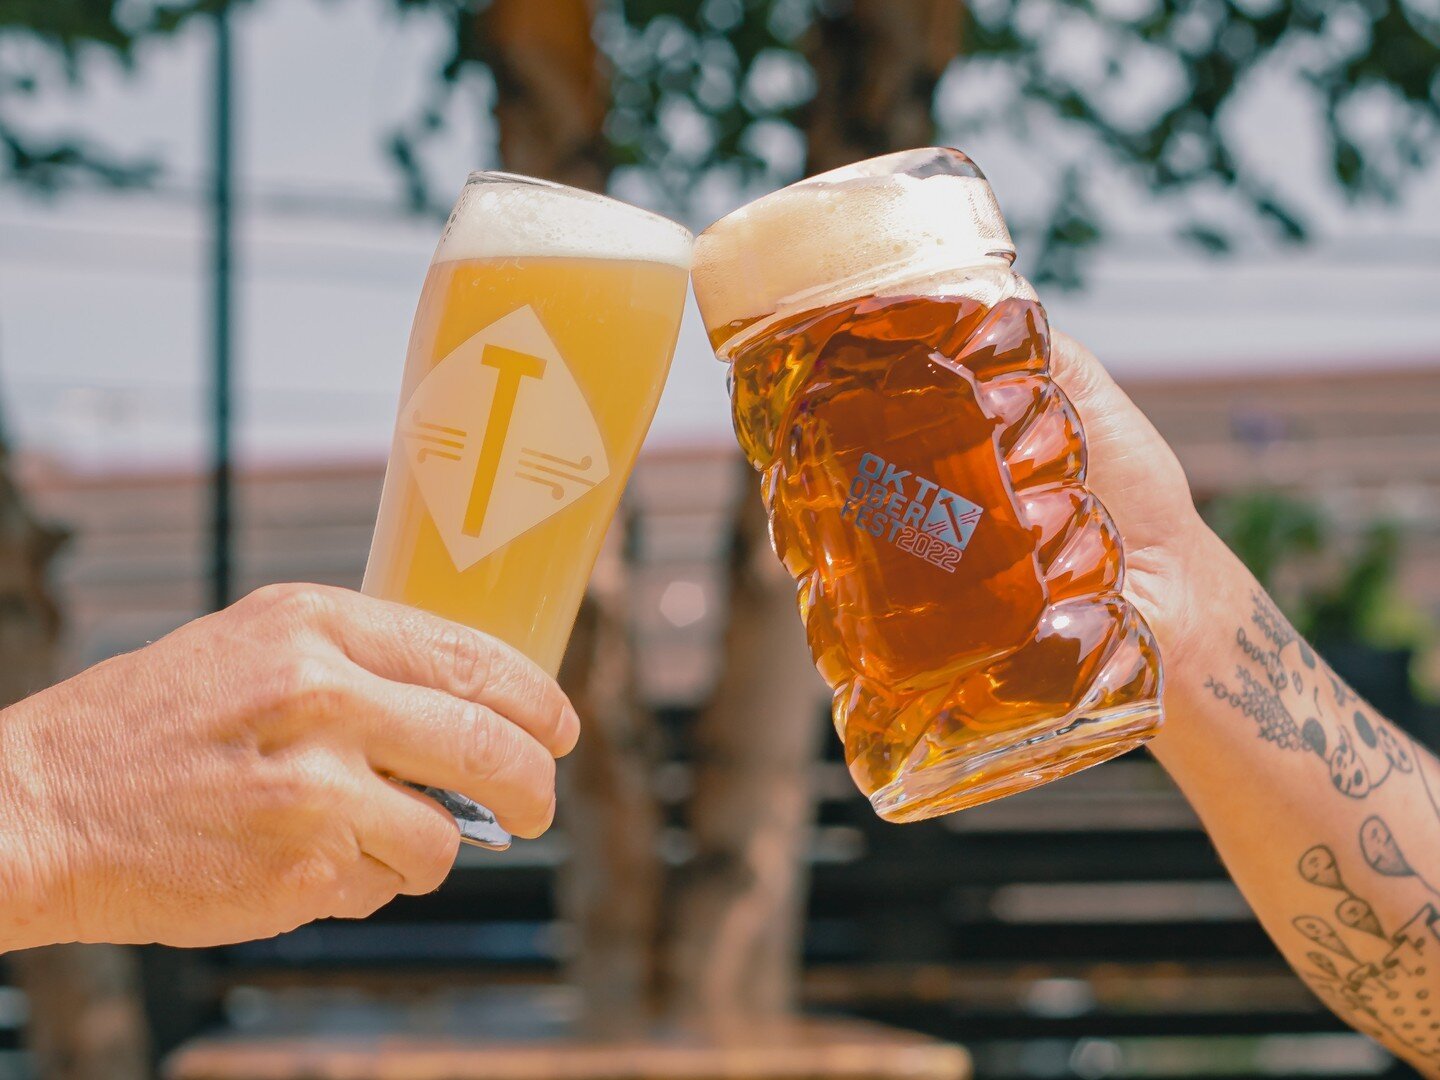 🍺 Join Us for Pint Night at Temperance Beer Co! 🐾

🗓️ Save the Date: March 12th, 6-10 PM

📍Temperance Beer Co is thrilled to announce the kick-off of our Pint Night Series! 🎉 For one special night, from 6 PM to 10 PM, we're teaming up with the E